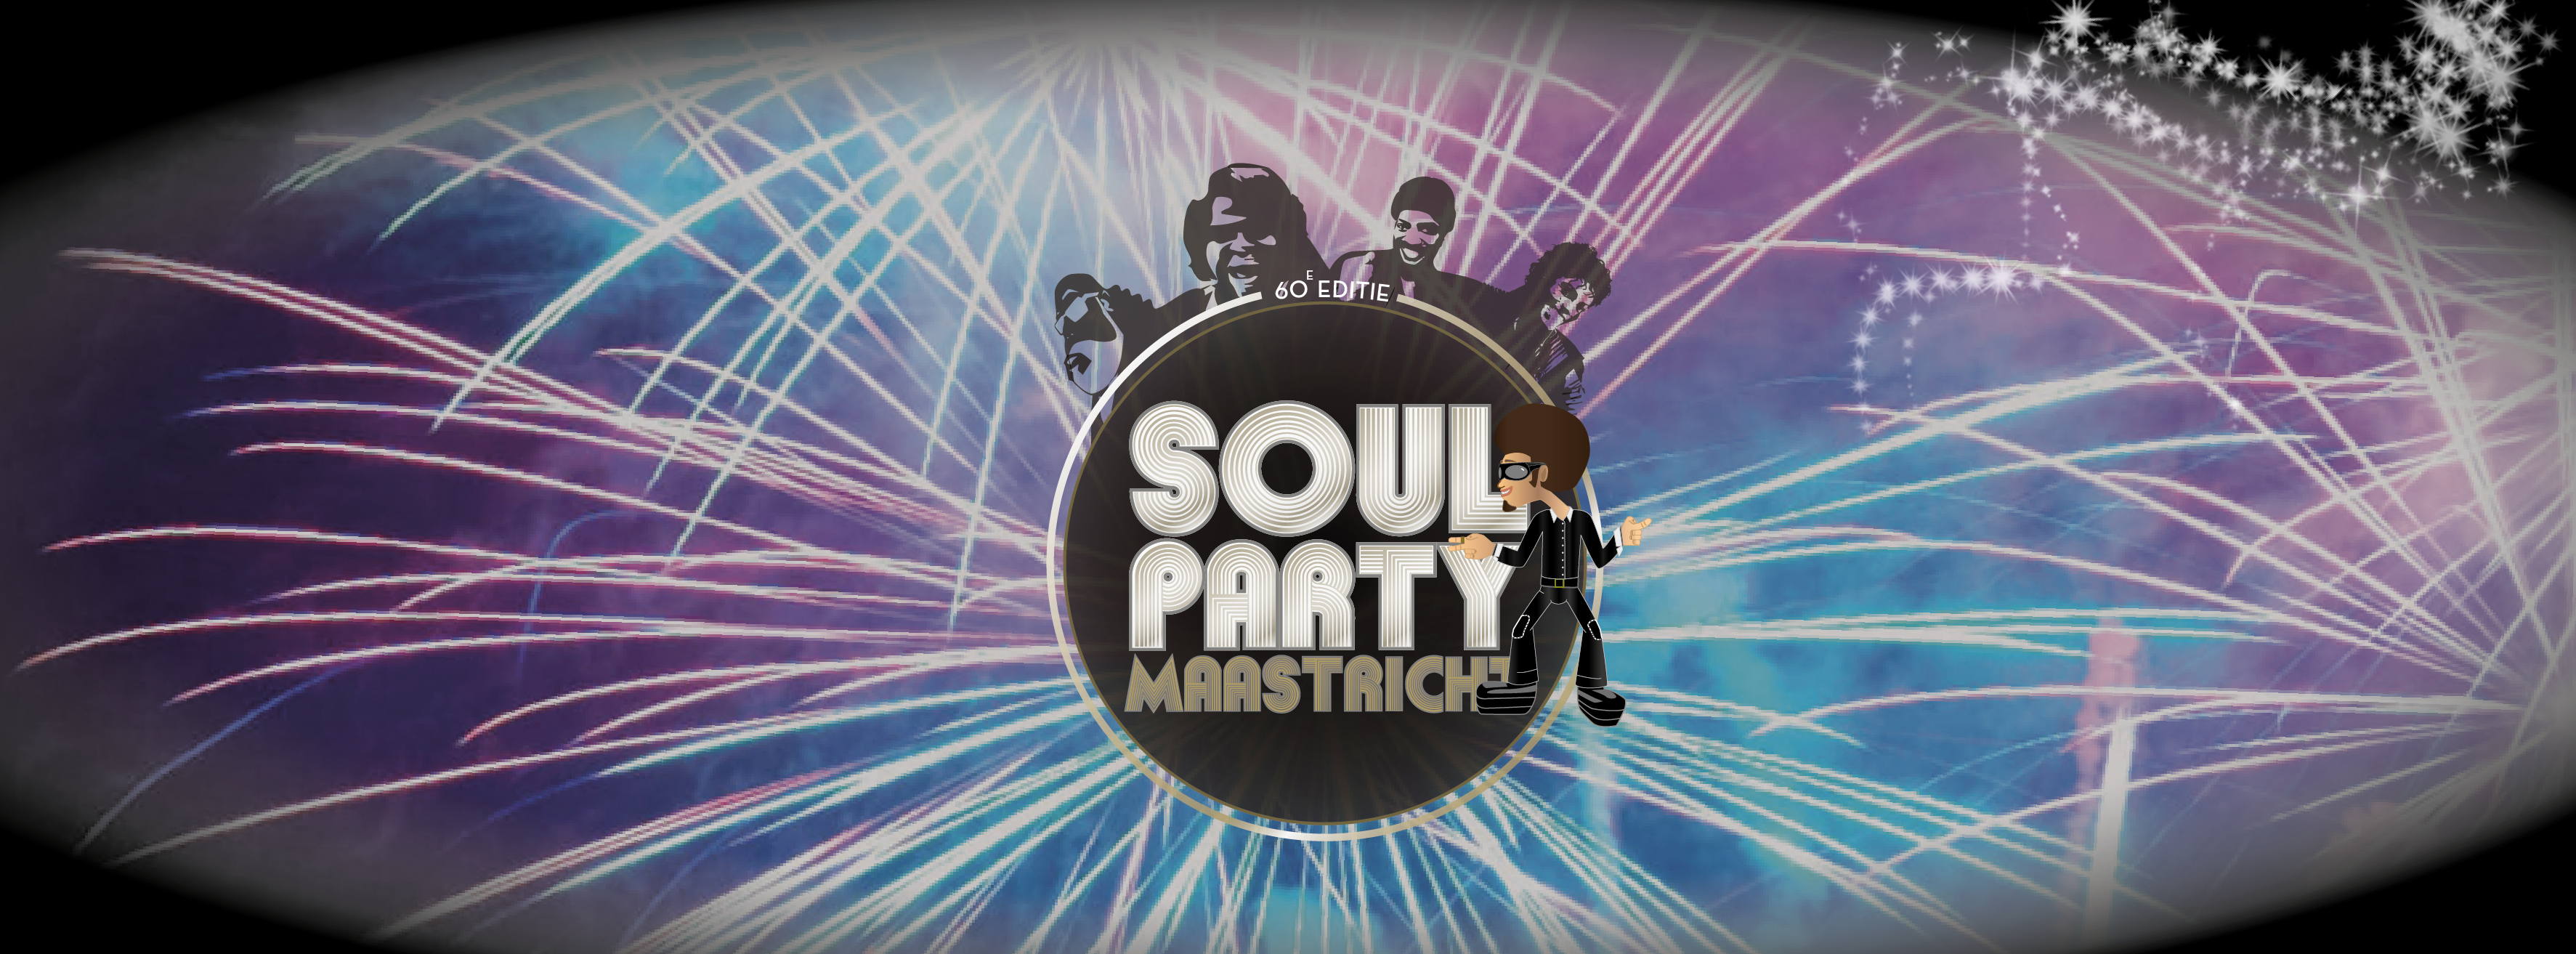 Soulparty 30 december 2017